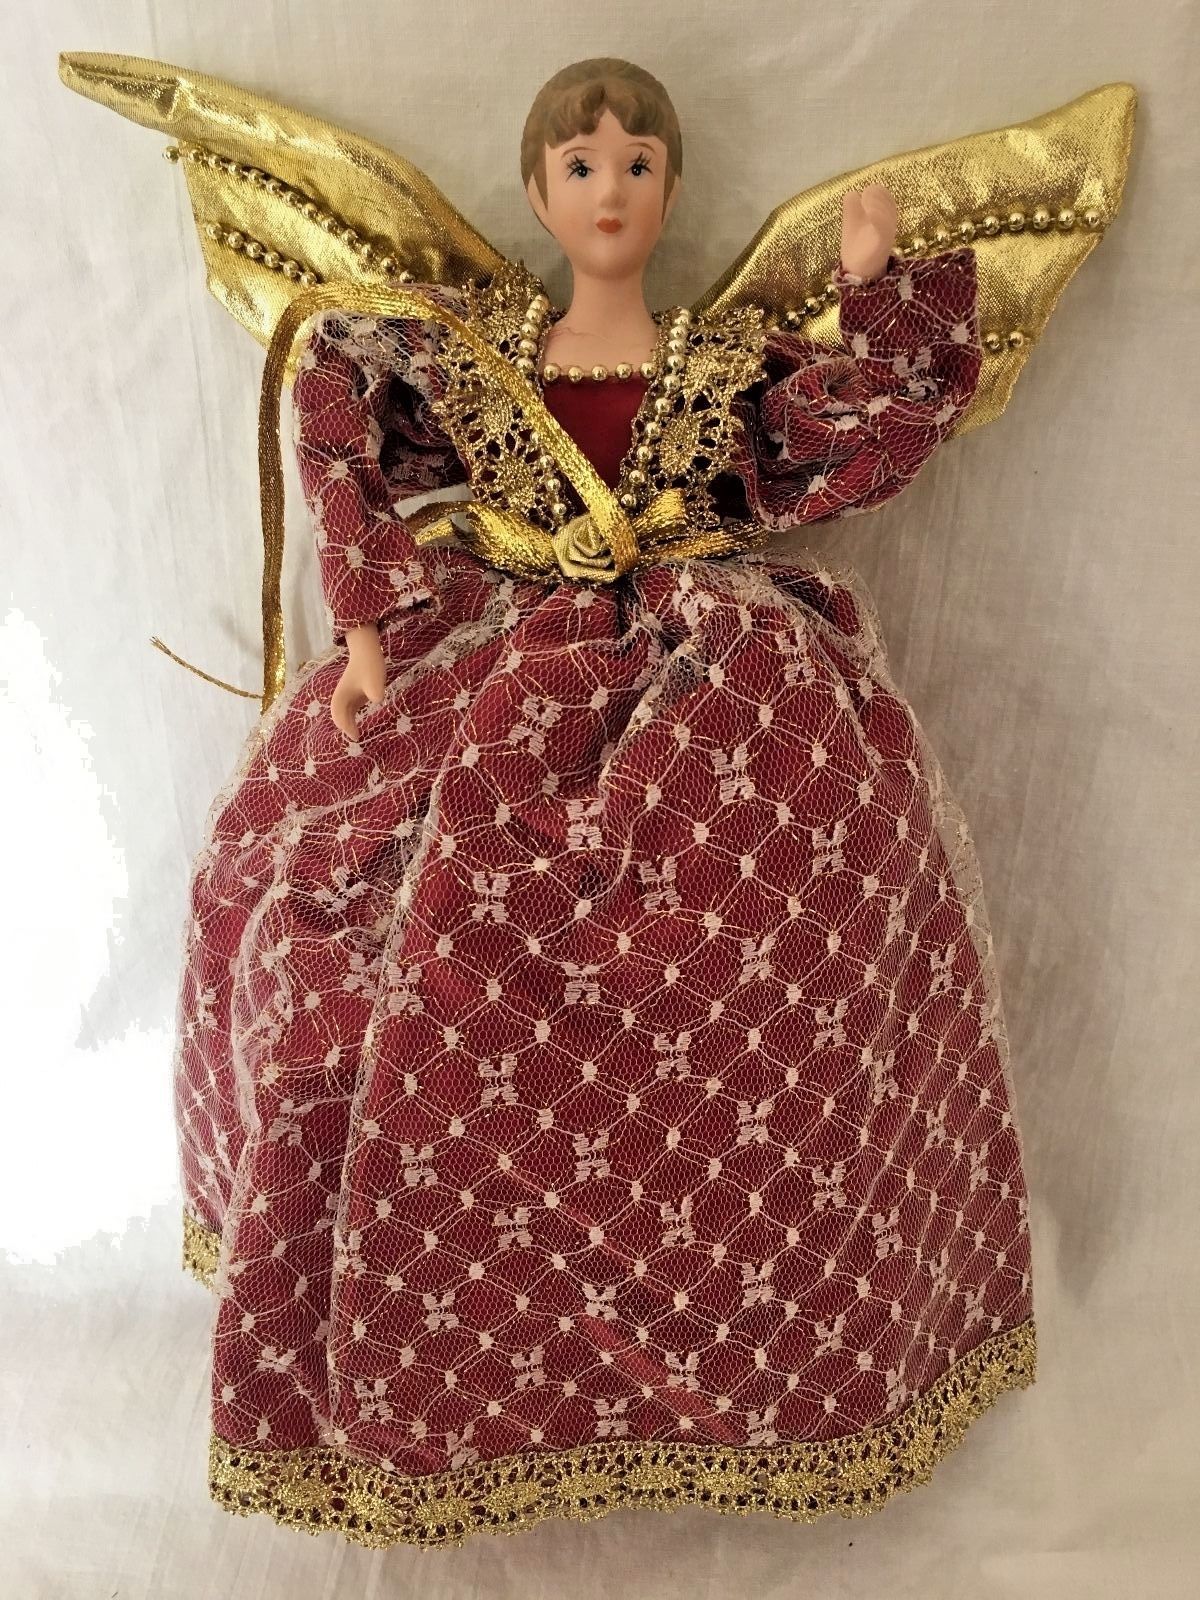 Porcelain Christmas Angel Tree Topper Ornament Burgundy Gown Lace Overlay 14.5" - $29.95